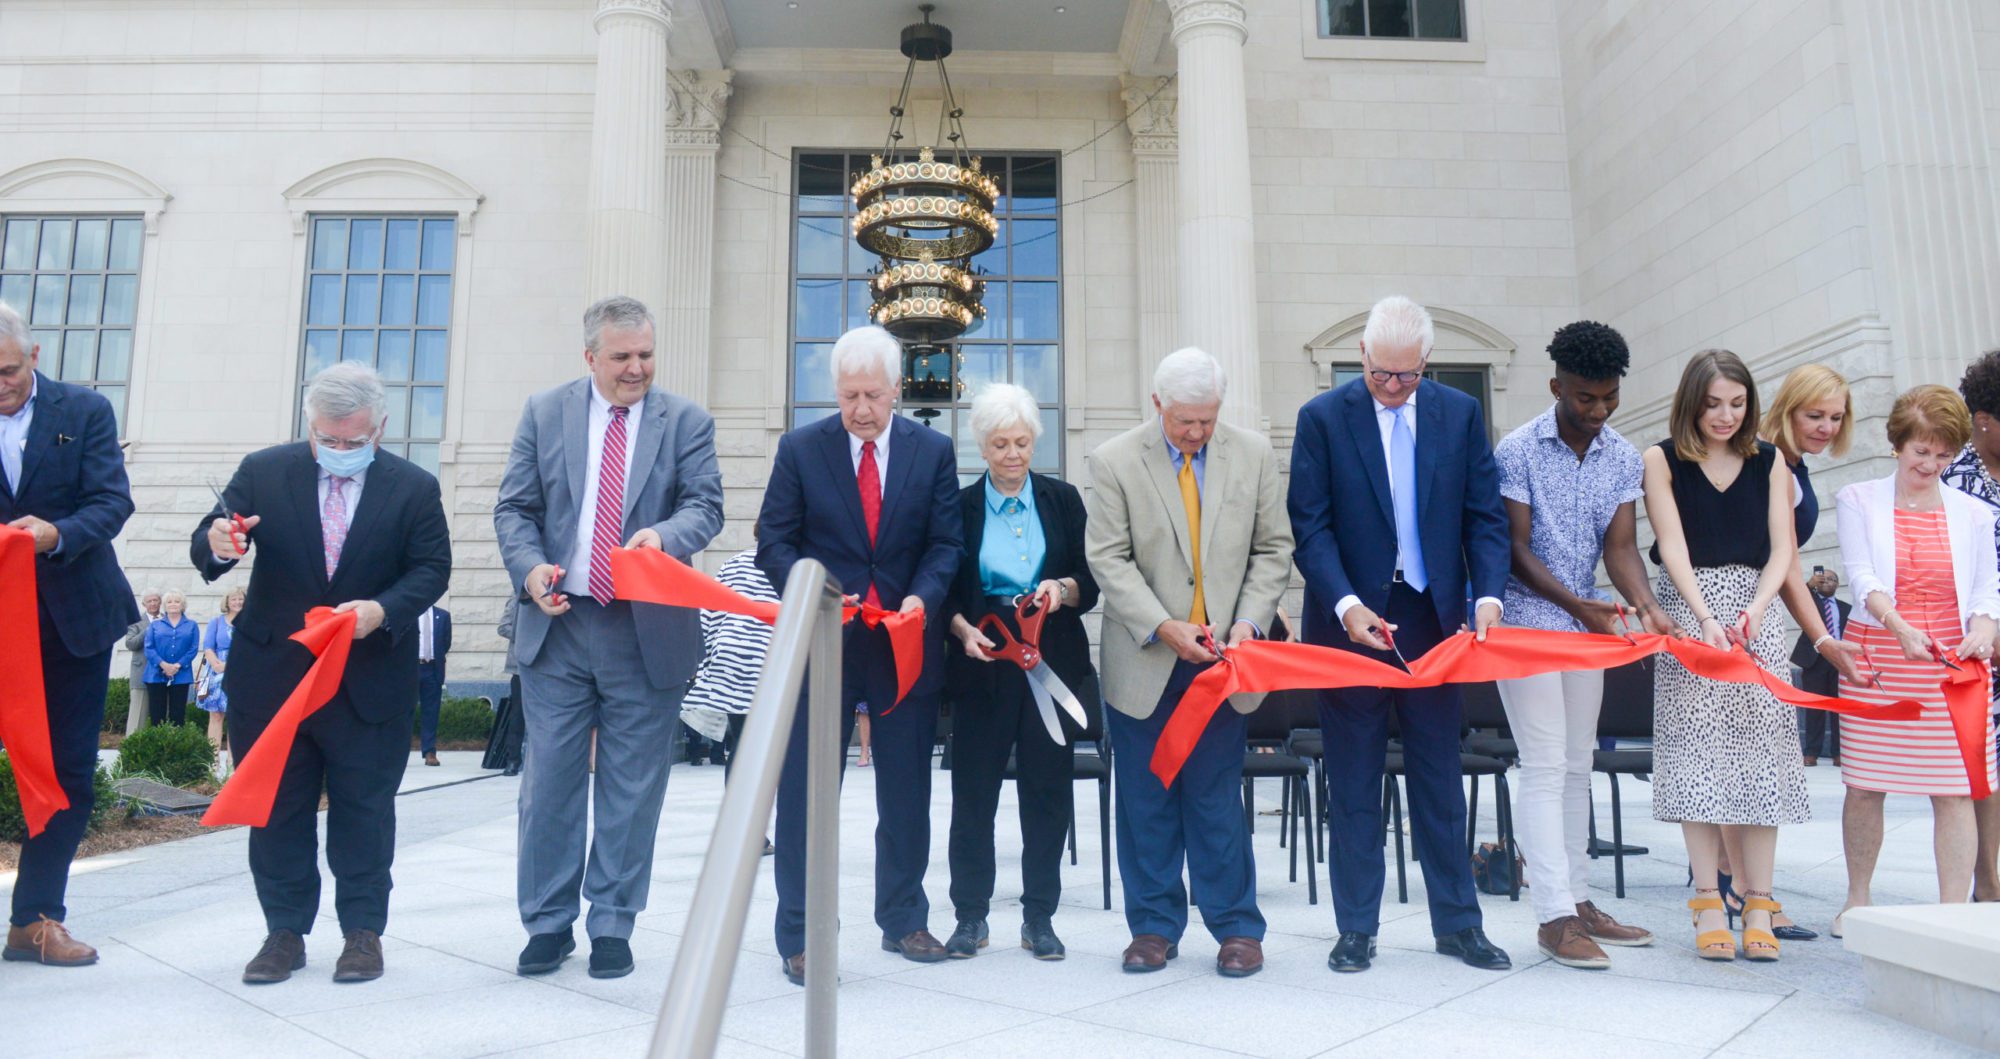 Belmont administrators and students, along with city officials, cut the ribbon today on the new Fisher Center for the Performing Arts. Picture left to right: Butch Spyridon, Mayor John Cooper, Dr. Greg Jones, Dr. Bob Fisher, Judy Fisher, Marty Dickens, Milton Johnson, David Perry, Avery Goodwin, Denice Johnson and Betty Dickens.